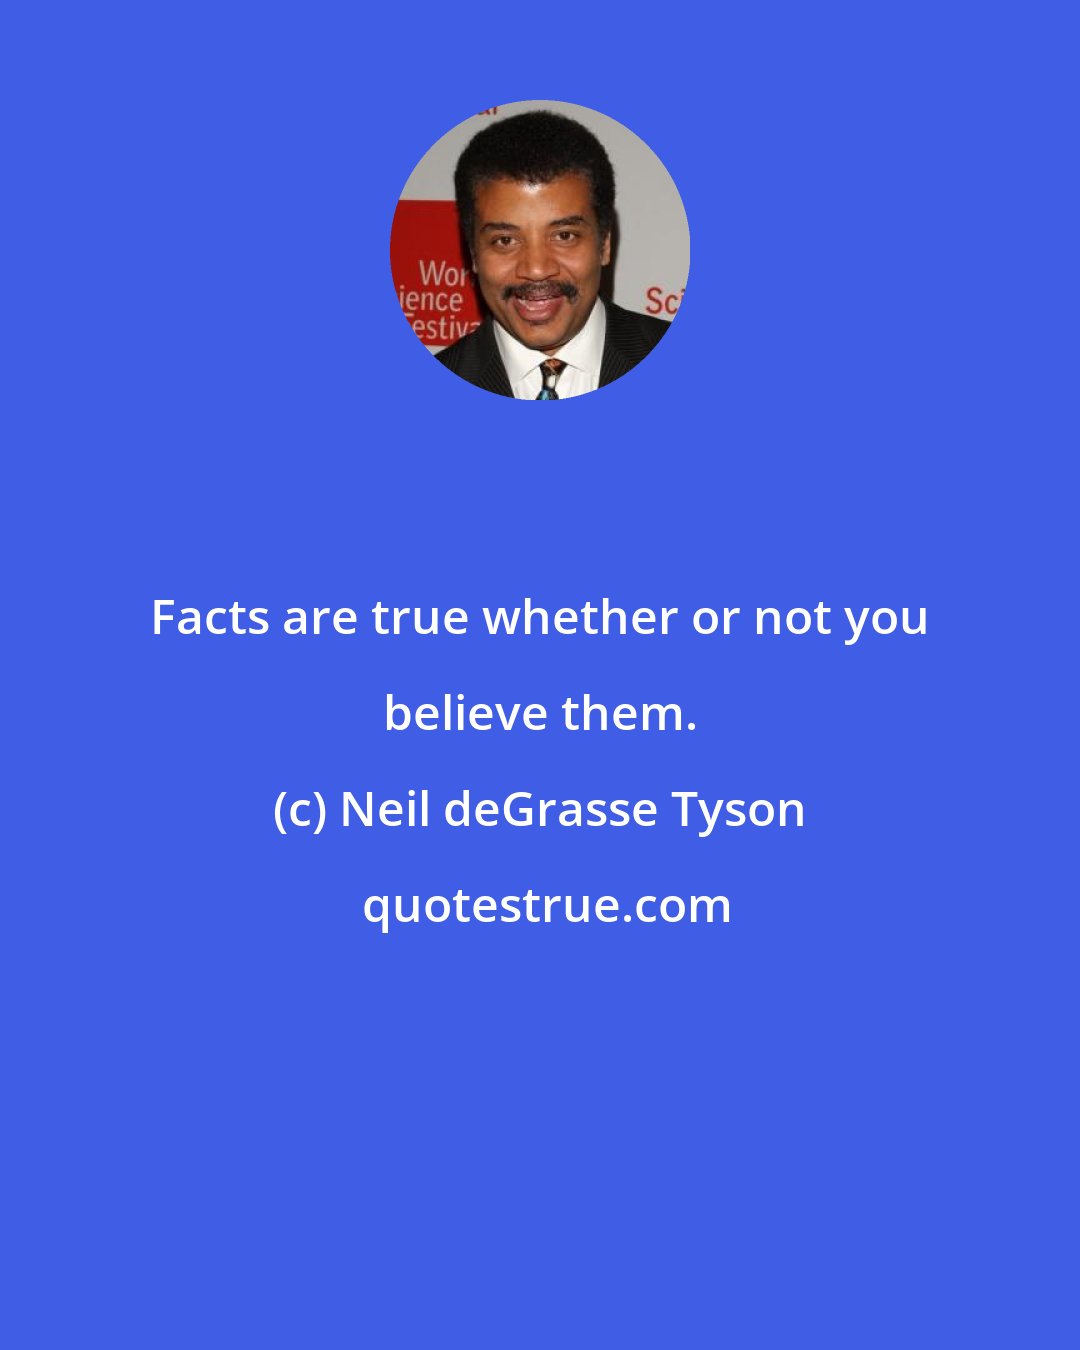 Neil deGrasse Tyson: Facts are true whether or not you believe them.